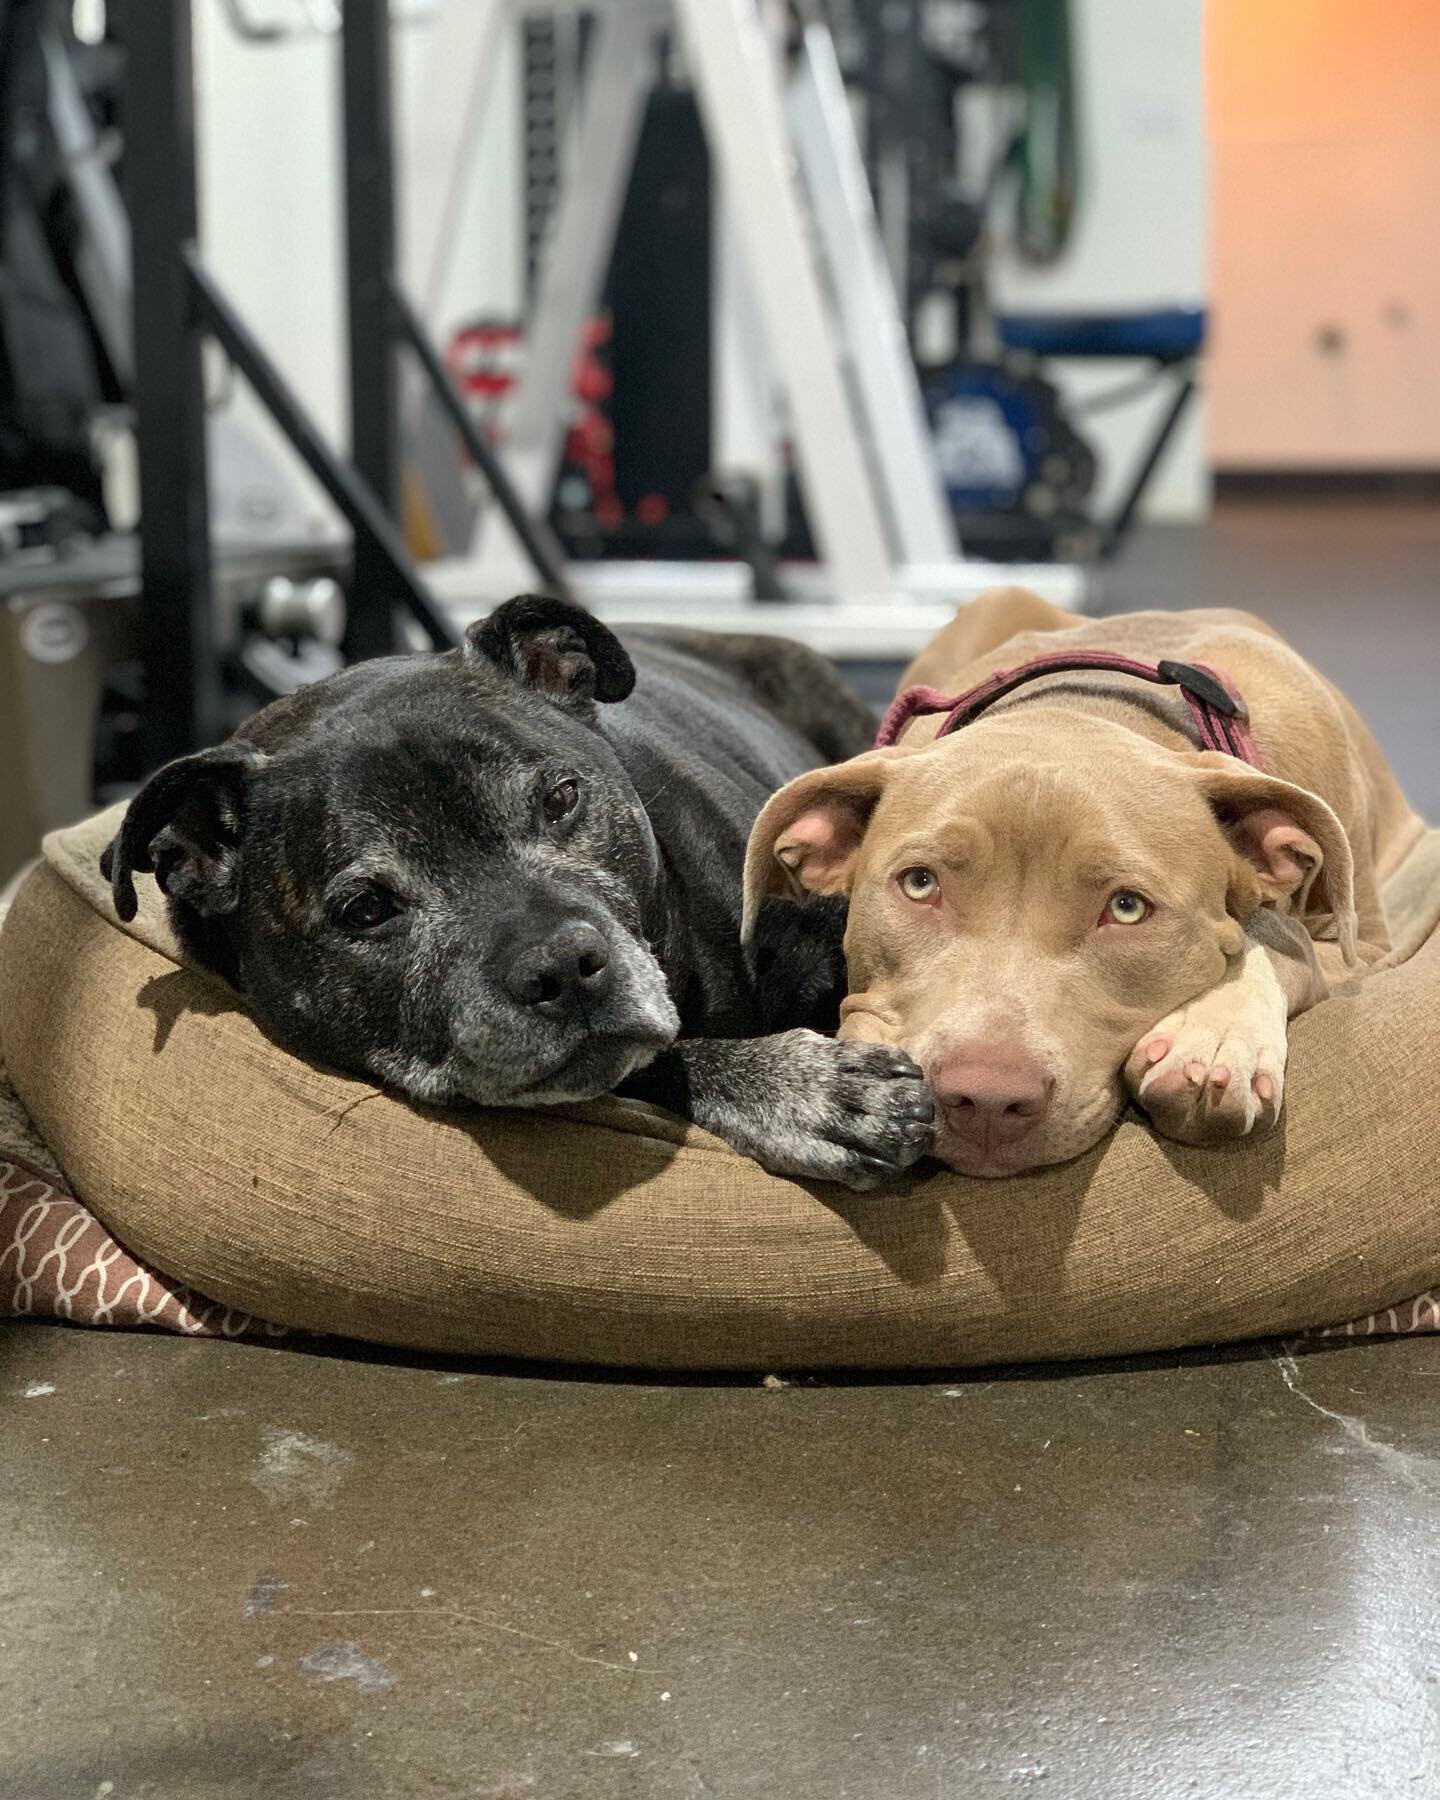 KINGSTON SAYS: 
.
The training is really going to intensify over the next few weeks as we build up to nationals. 
.
Make sure you grab your snuggle buddy and take advantage of your rest days! 
.
PS @zoe.amenta is not my snuggle buddy, she just intrud